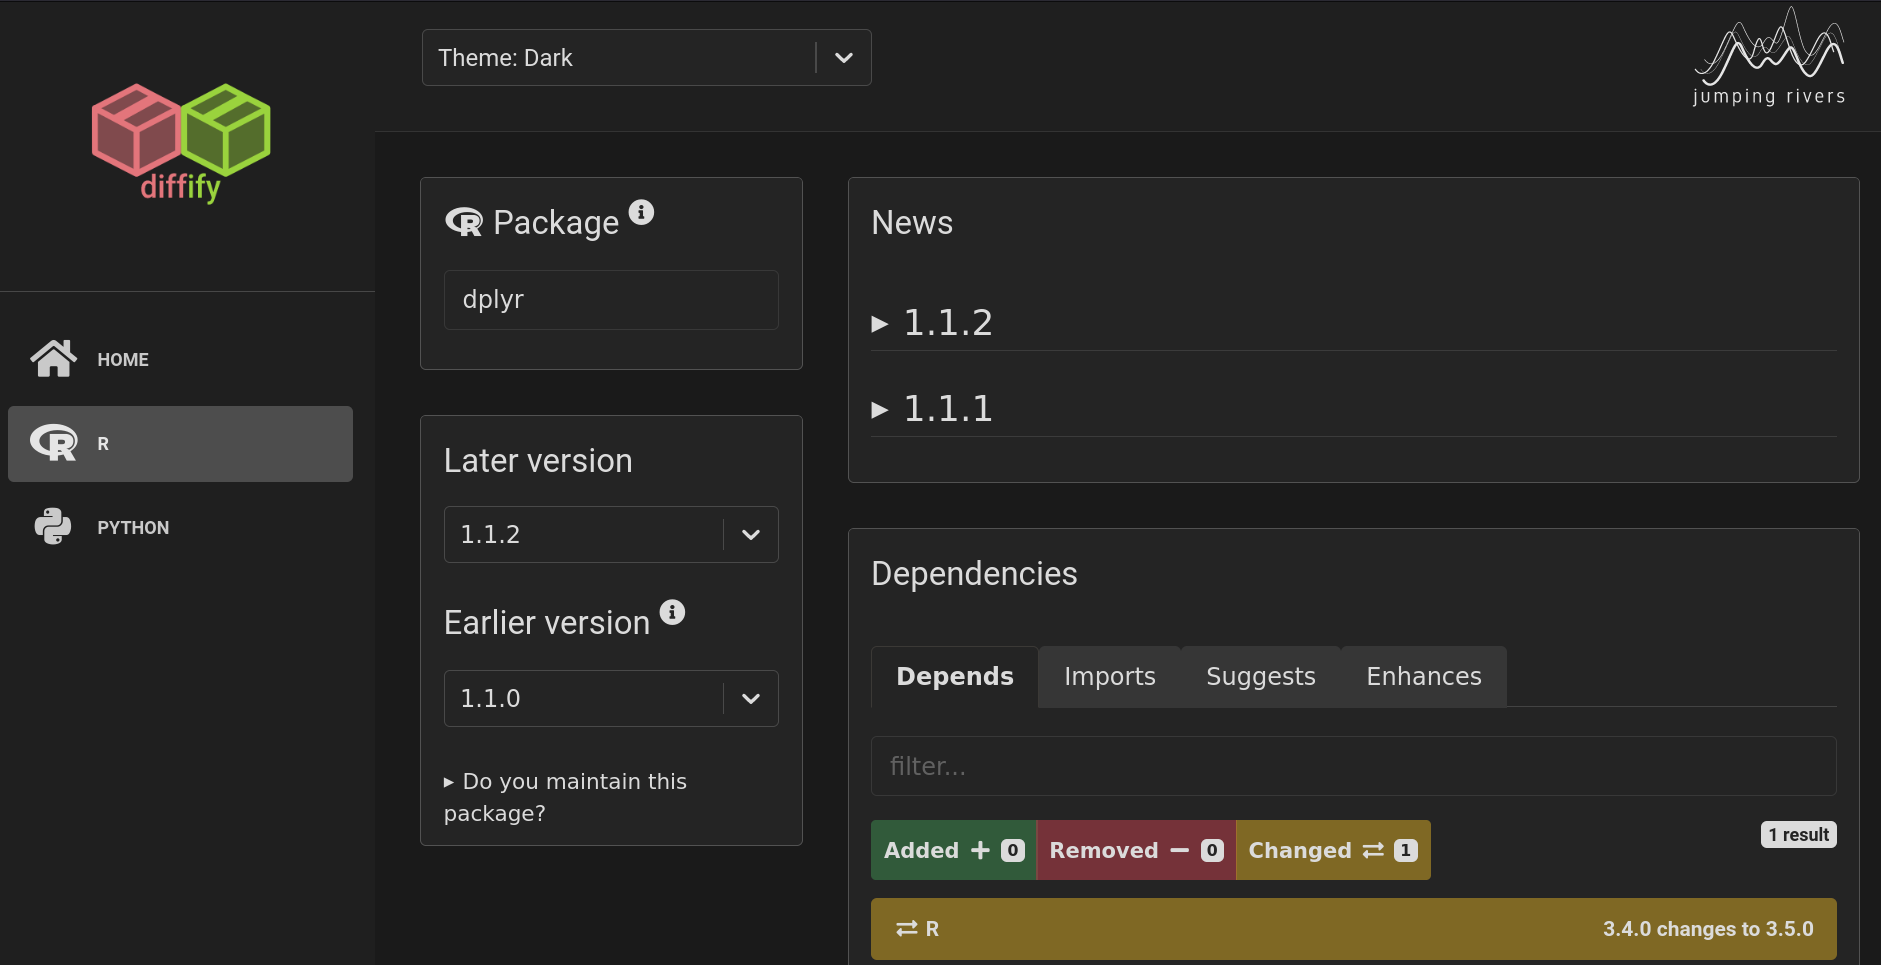 A screenshot of the diffify webpage with the new dark theme applied: The webpage displays some changes between versions 1.1.0 and 1.1.2 of the {dplyr} package. With the dark theme applied, the background is now darkened and the colour of the text has been changed to white to maintain a high contrast.